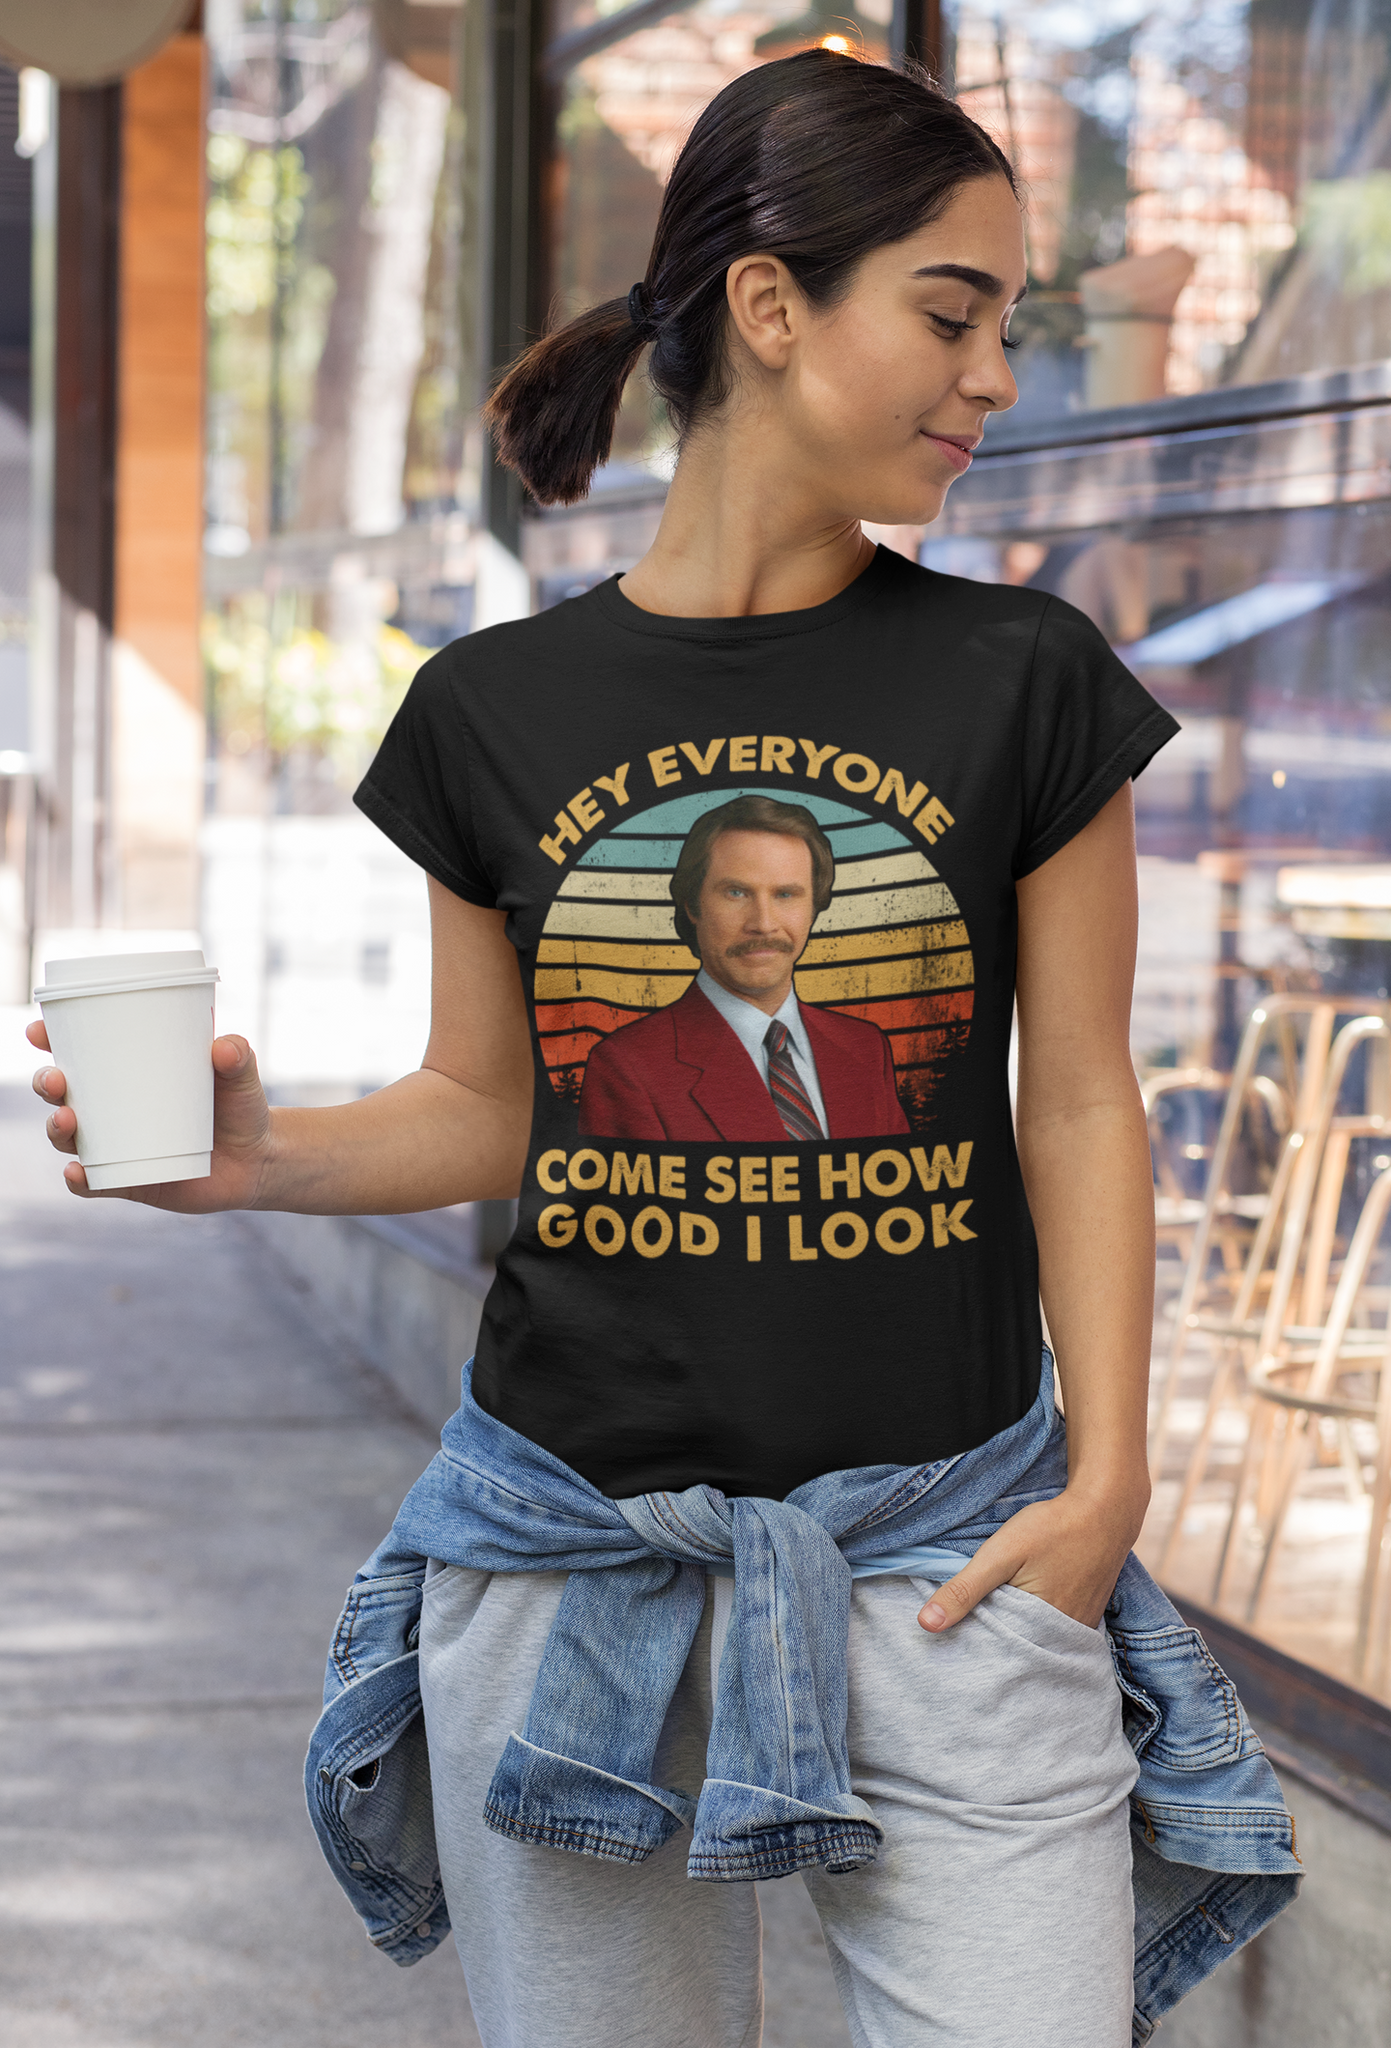 Anchorman Vintage T Shirt, Ron Burgundy T Shirt, Hey Everyone Come See How Good I Look shirt